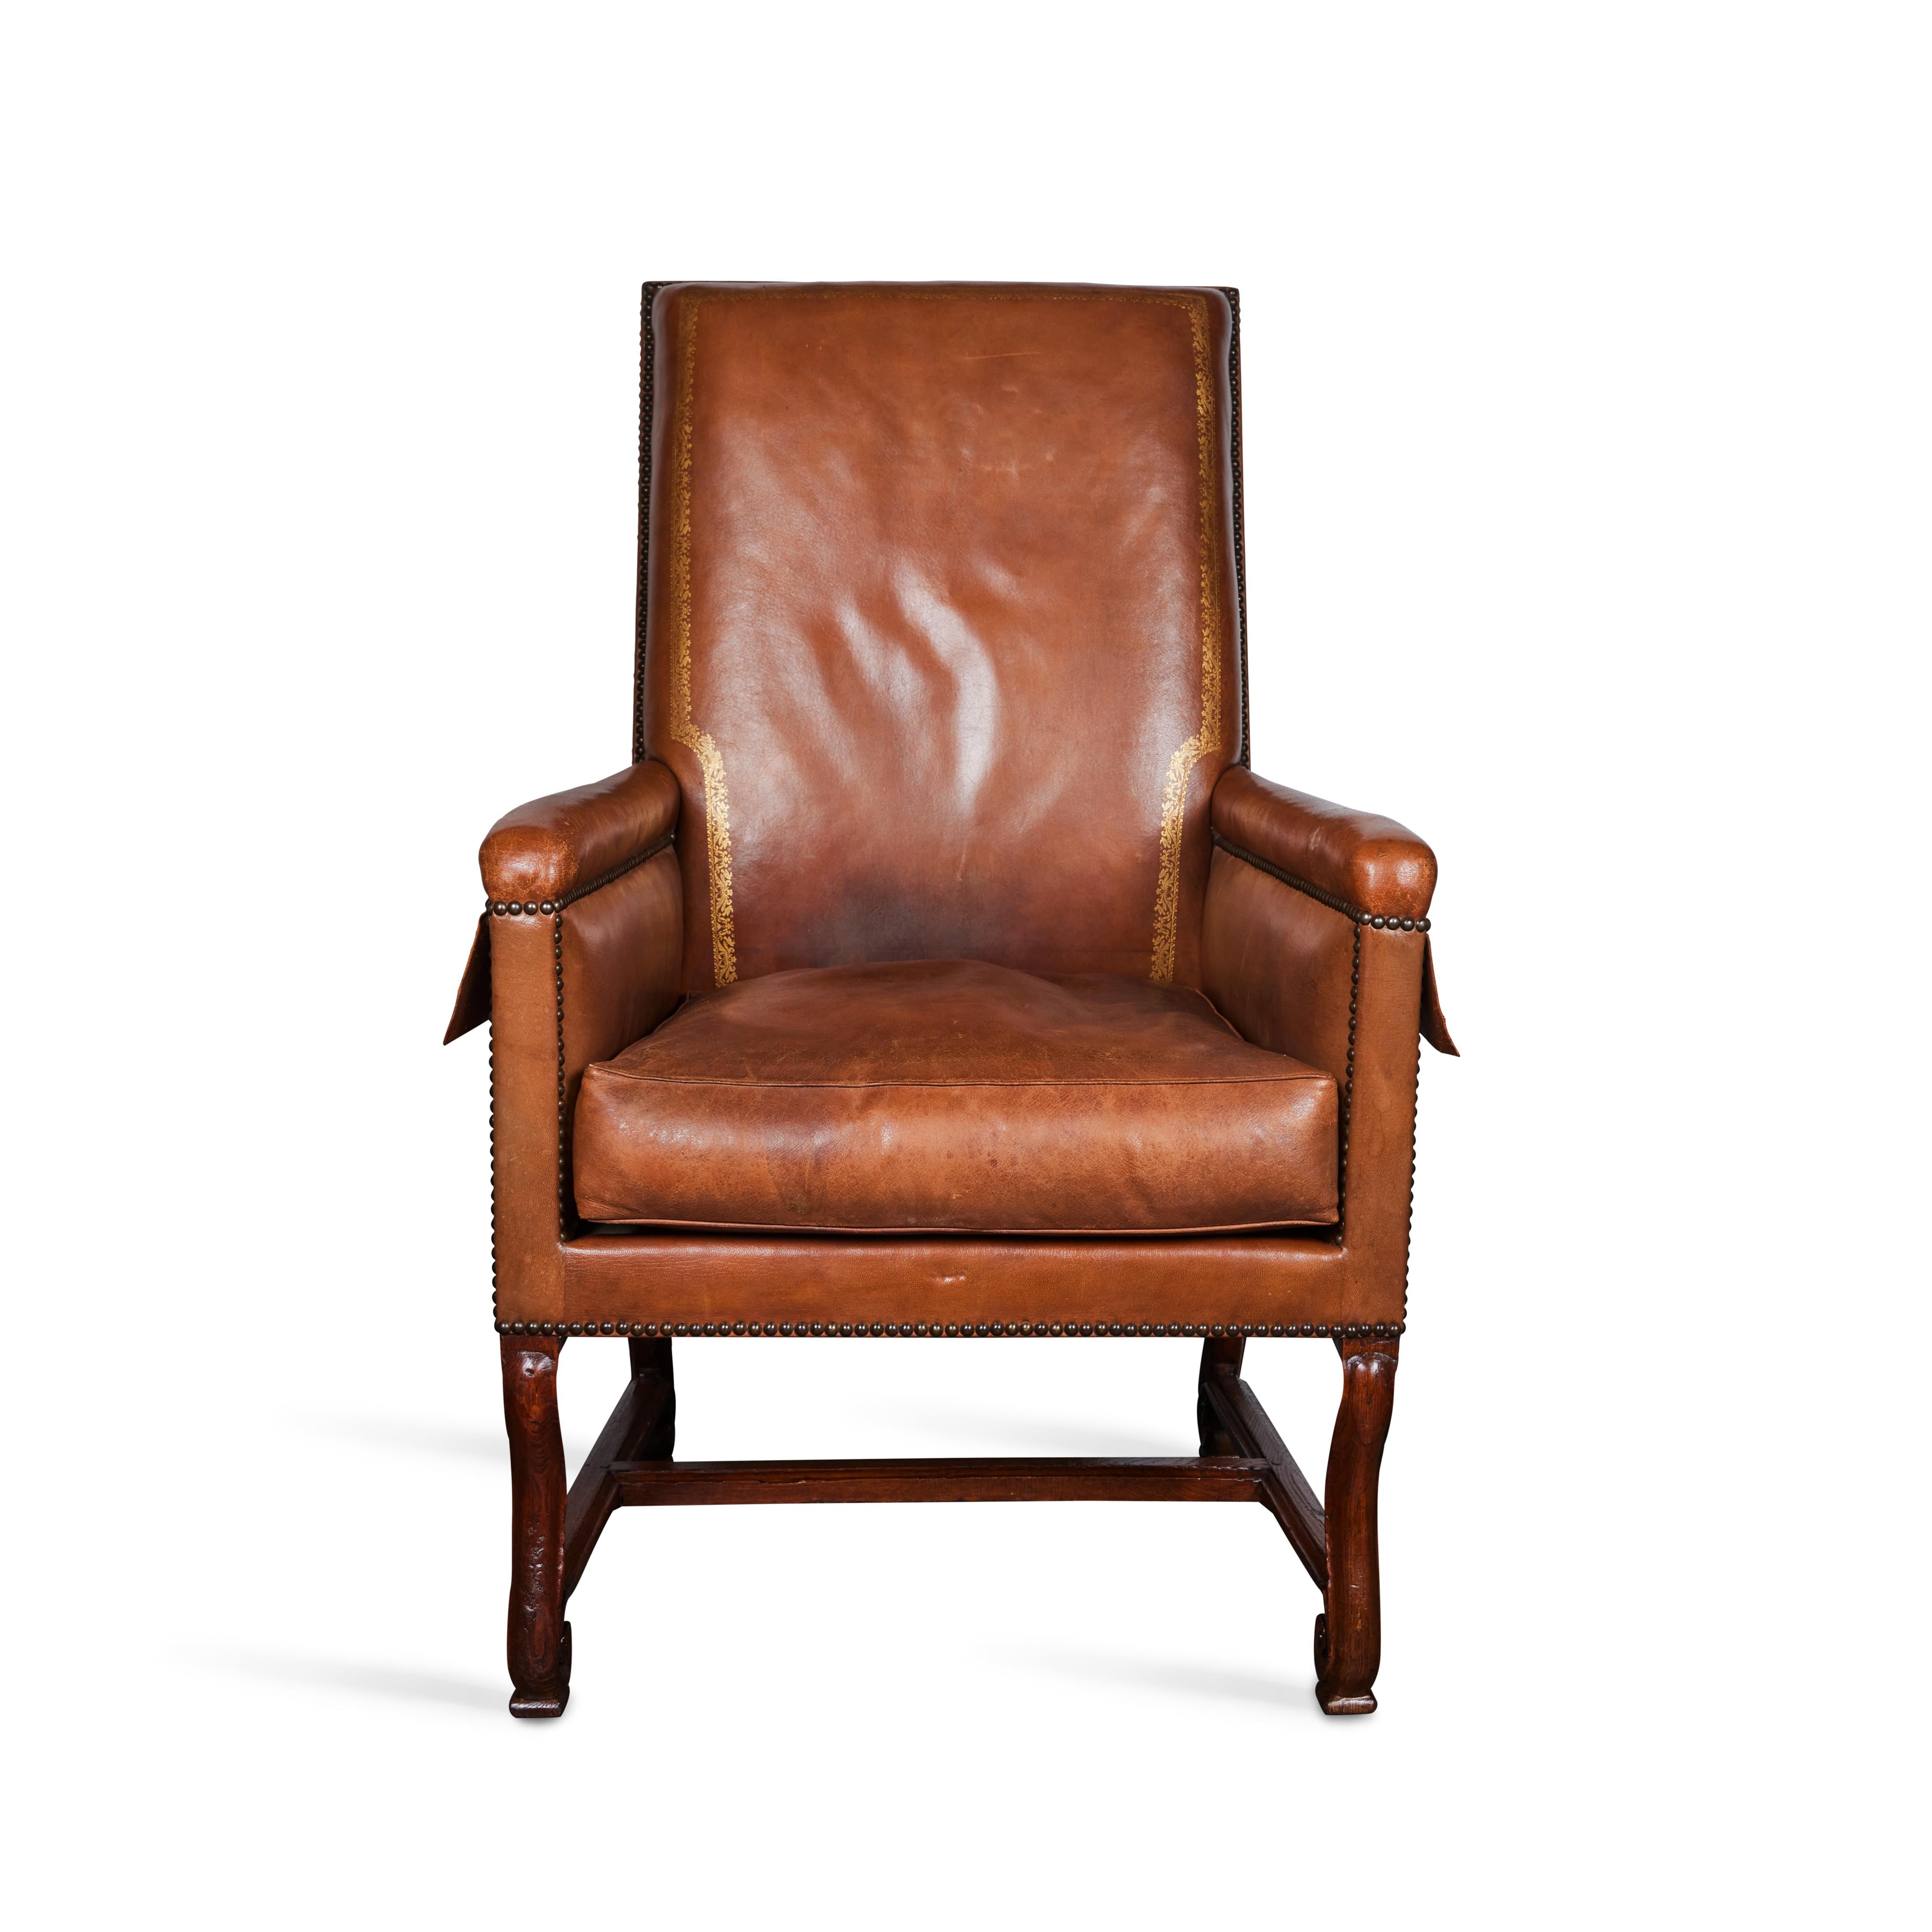 Hand carved walnut armchair with original gold embossed trimmed leather and nail heads.  Side pockets.  